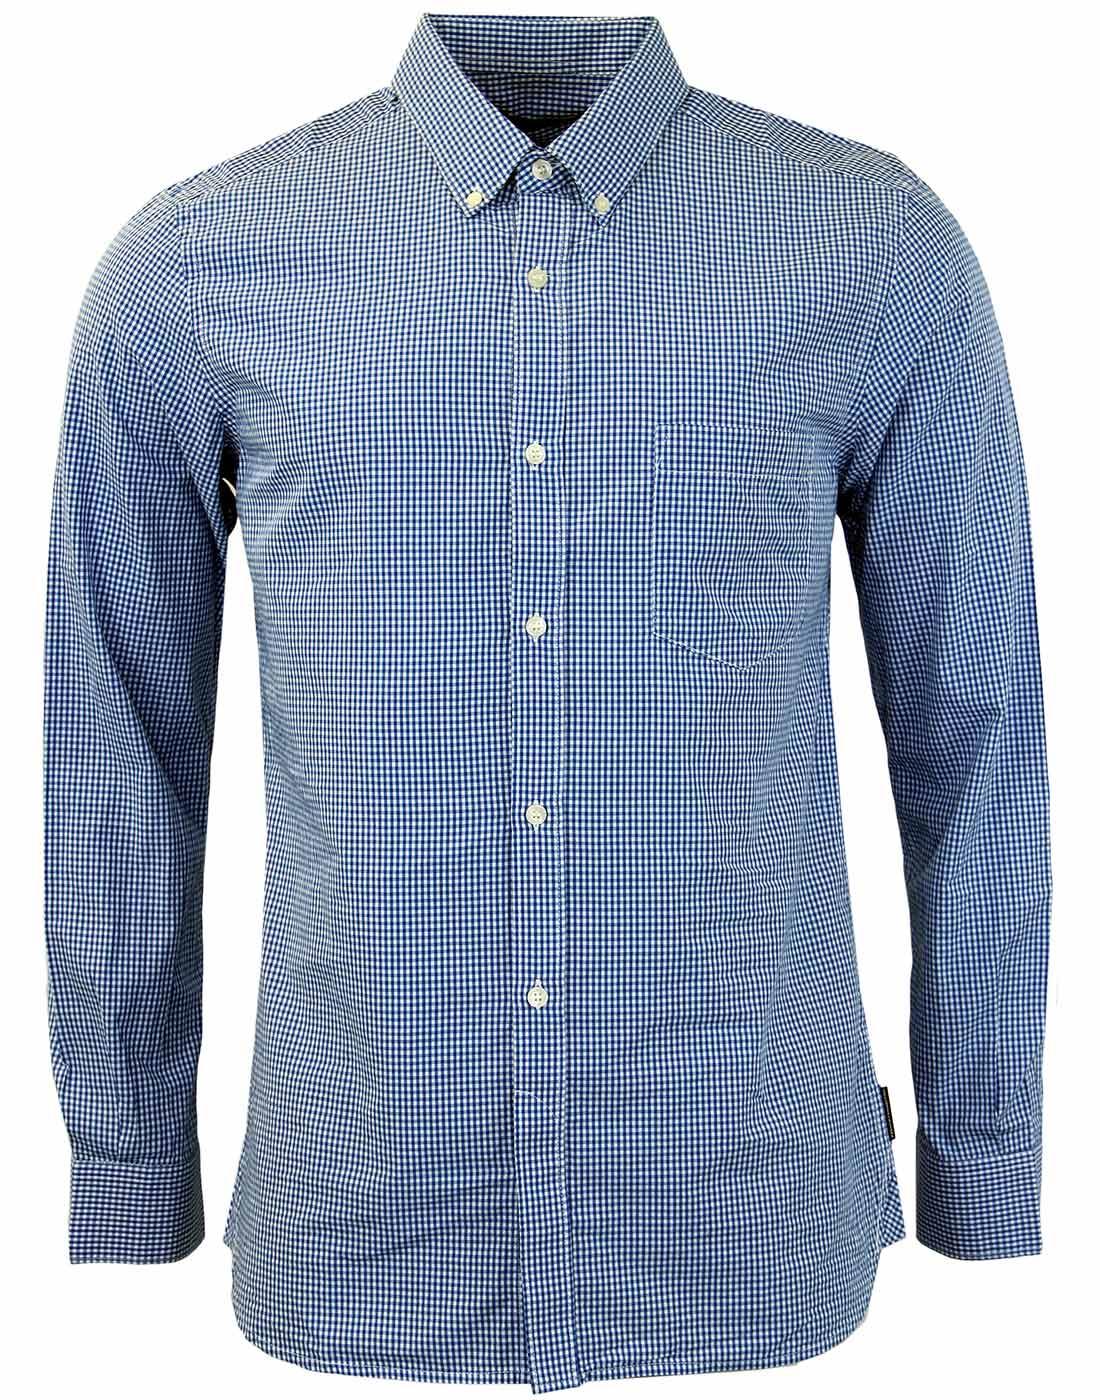 FRENCH CONNECTION Retro Mod Button Down Gingham Shirt in Blue